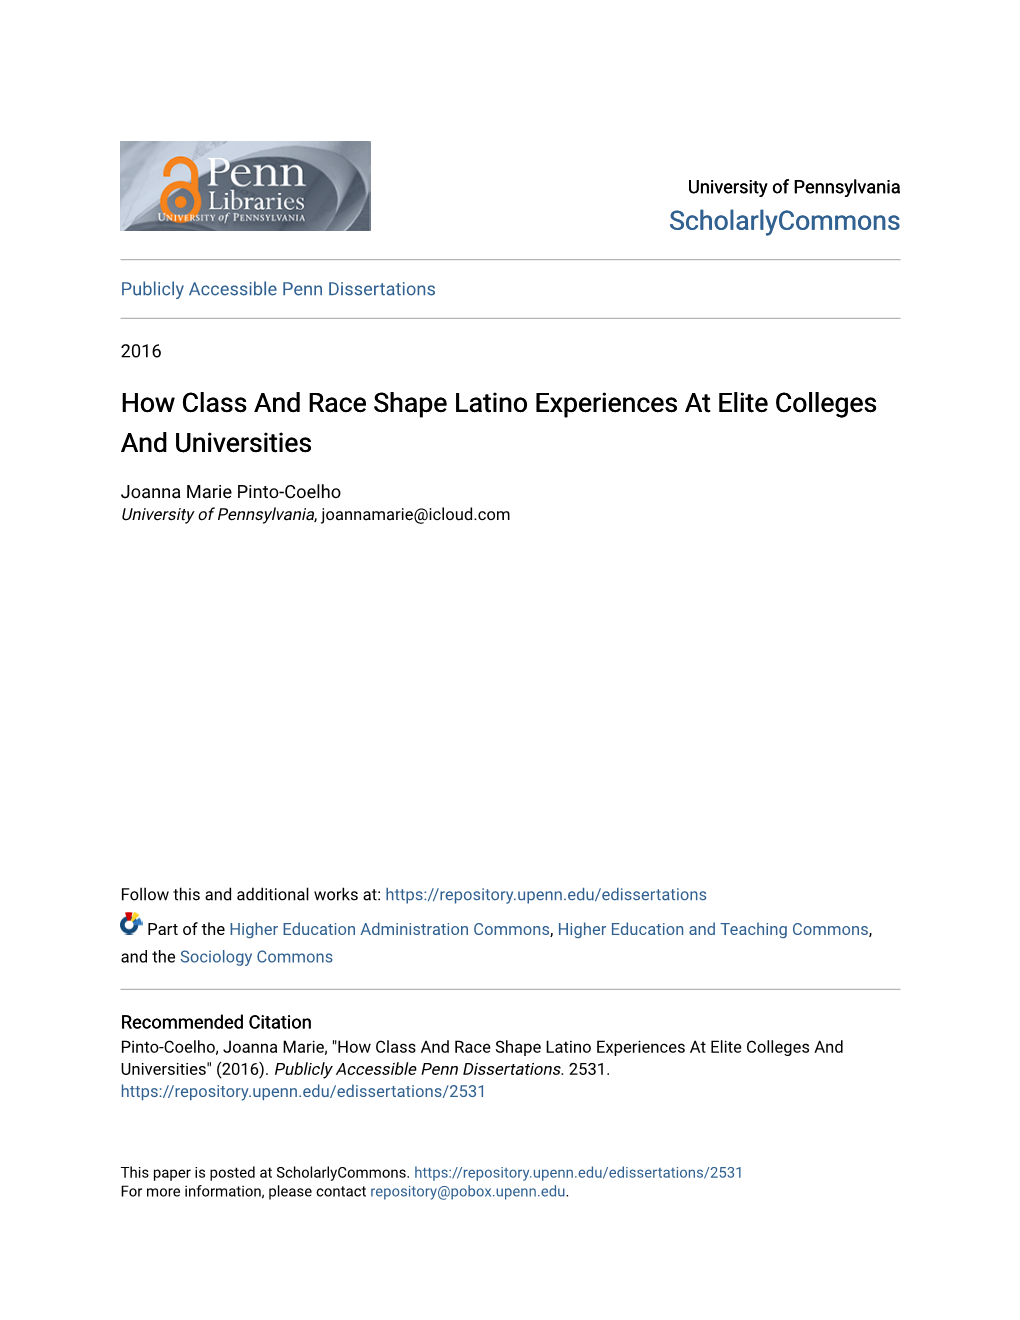 How Class and Race Shape Latino Experiences at Elite Colleges and Universities